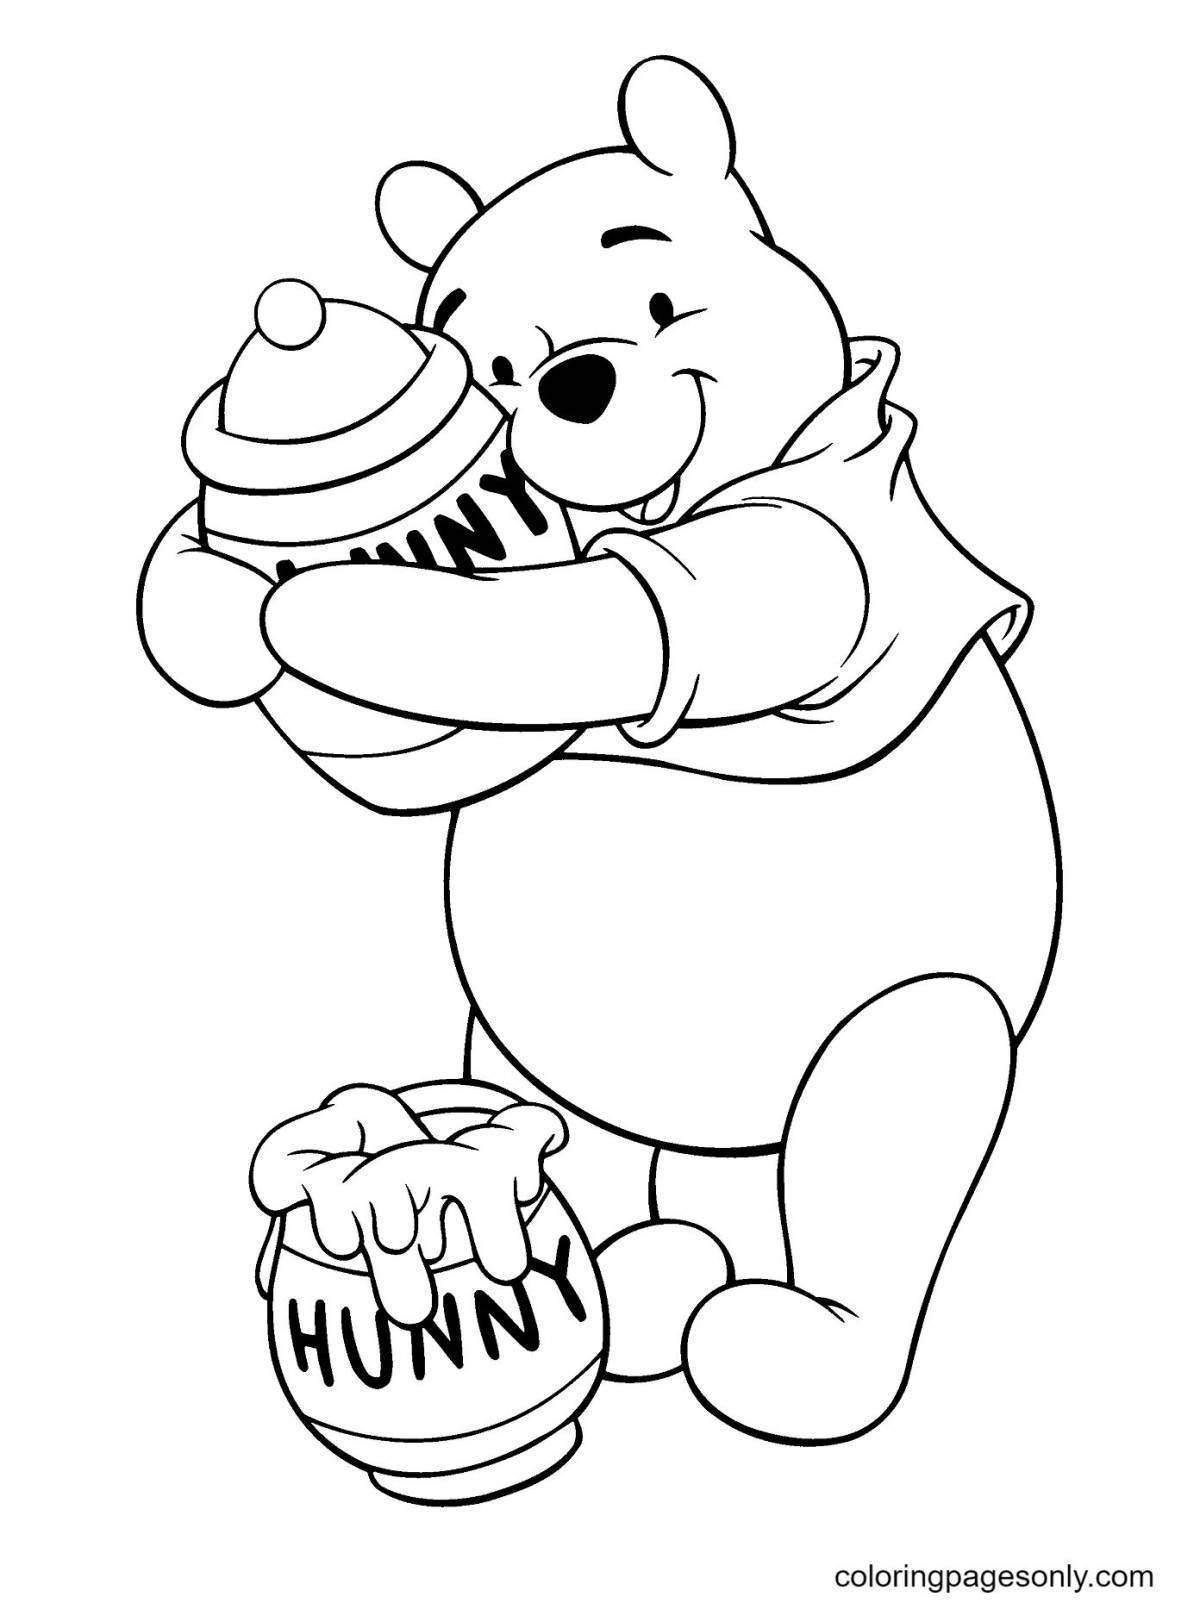 Furry bear with honey coloring book